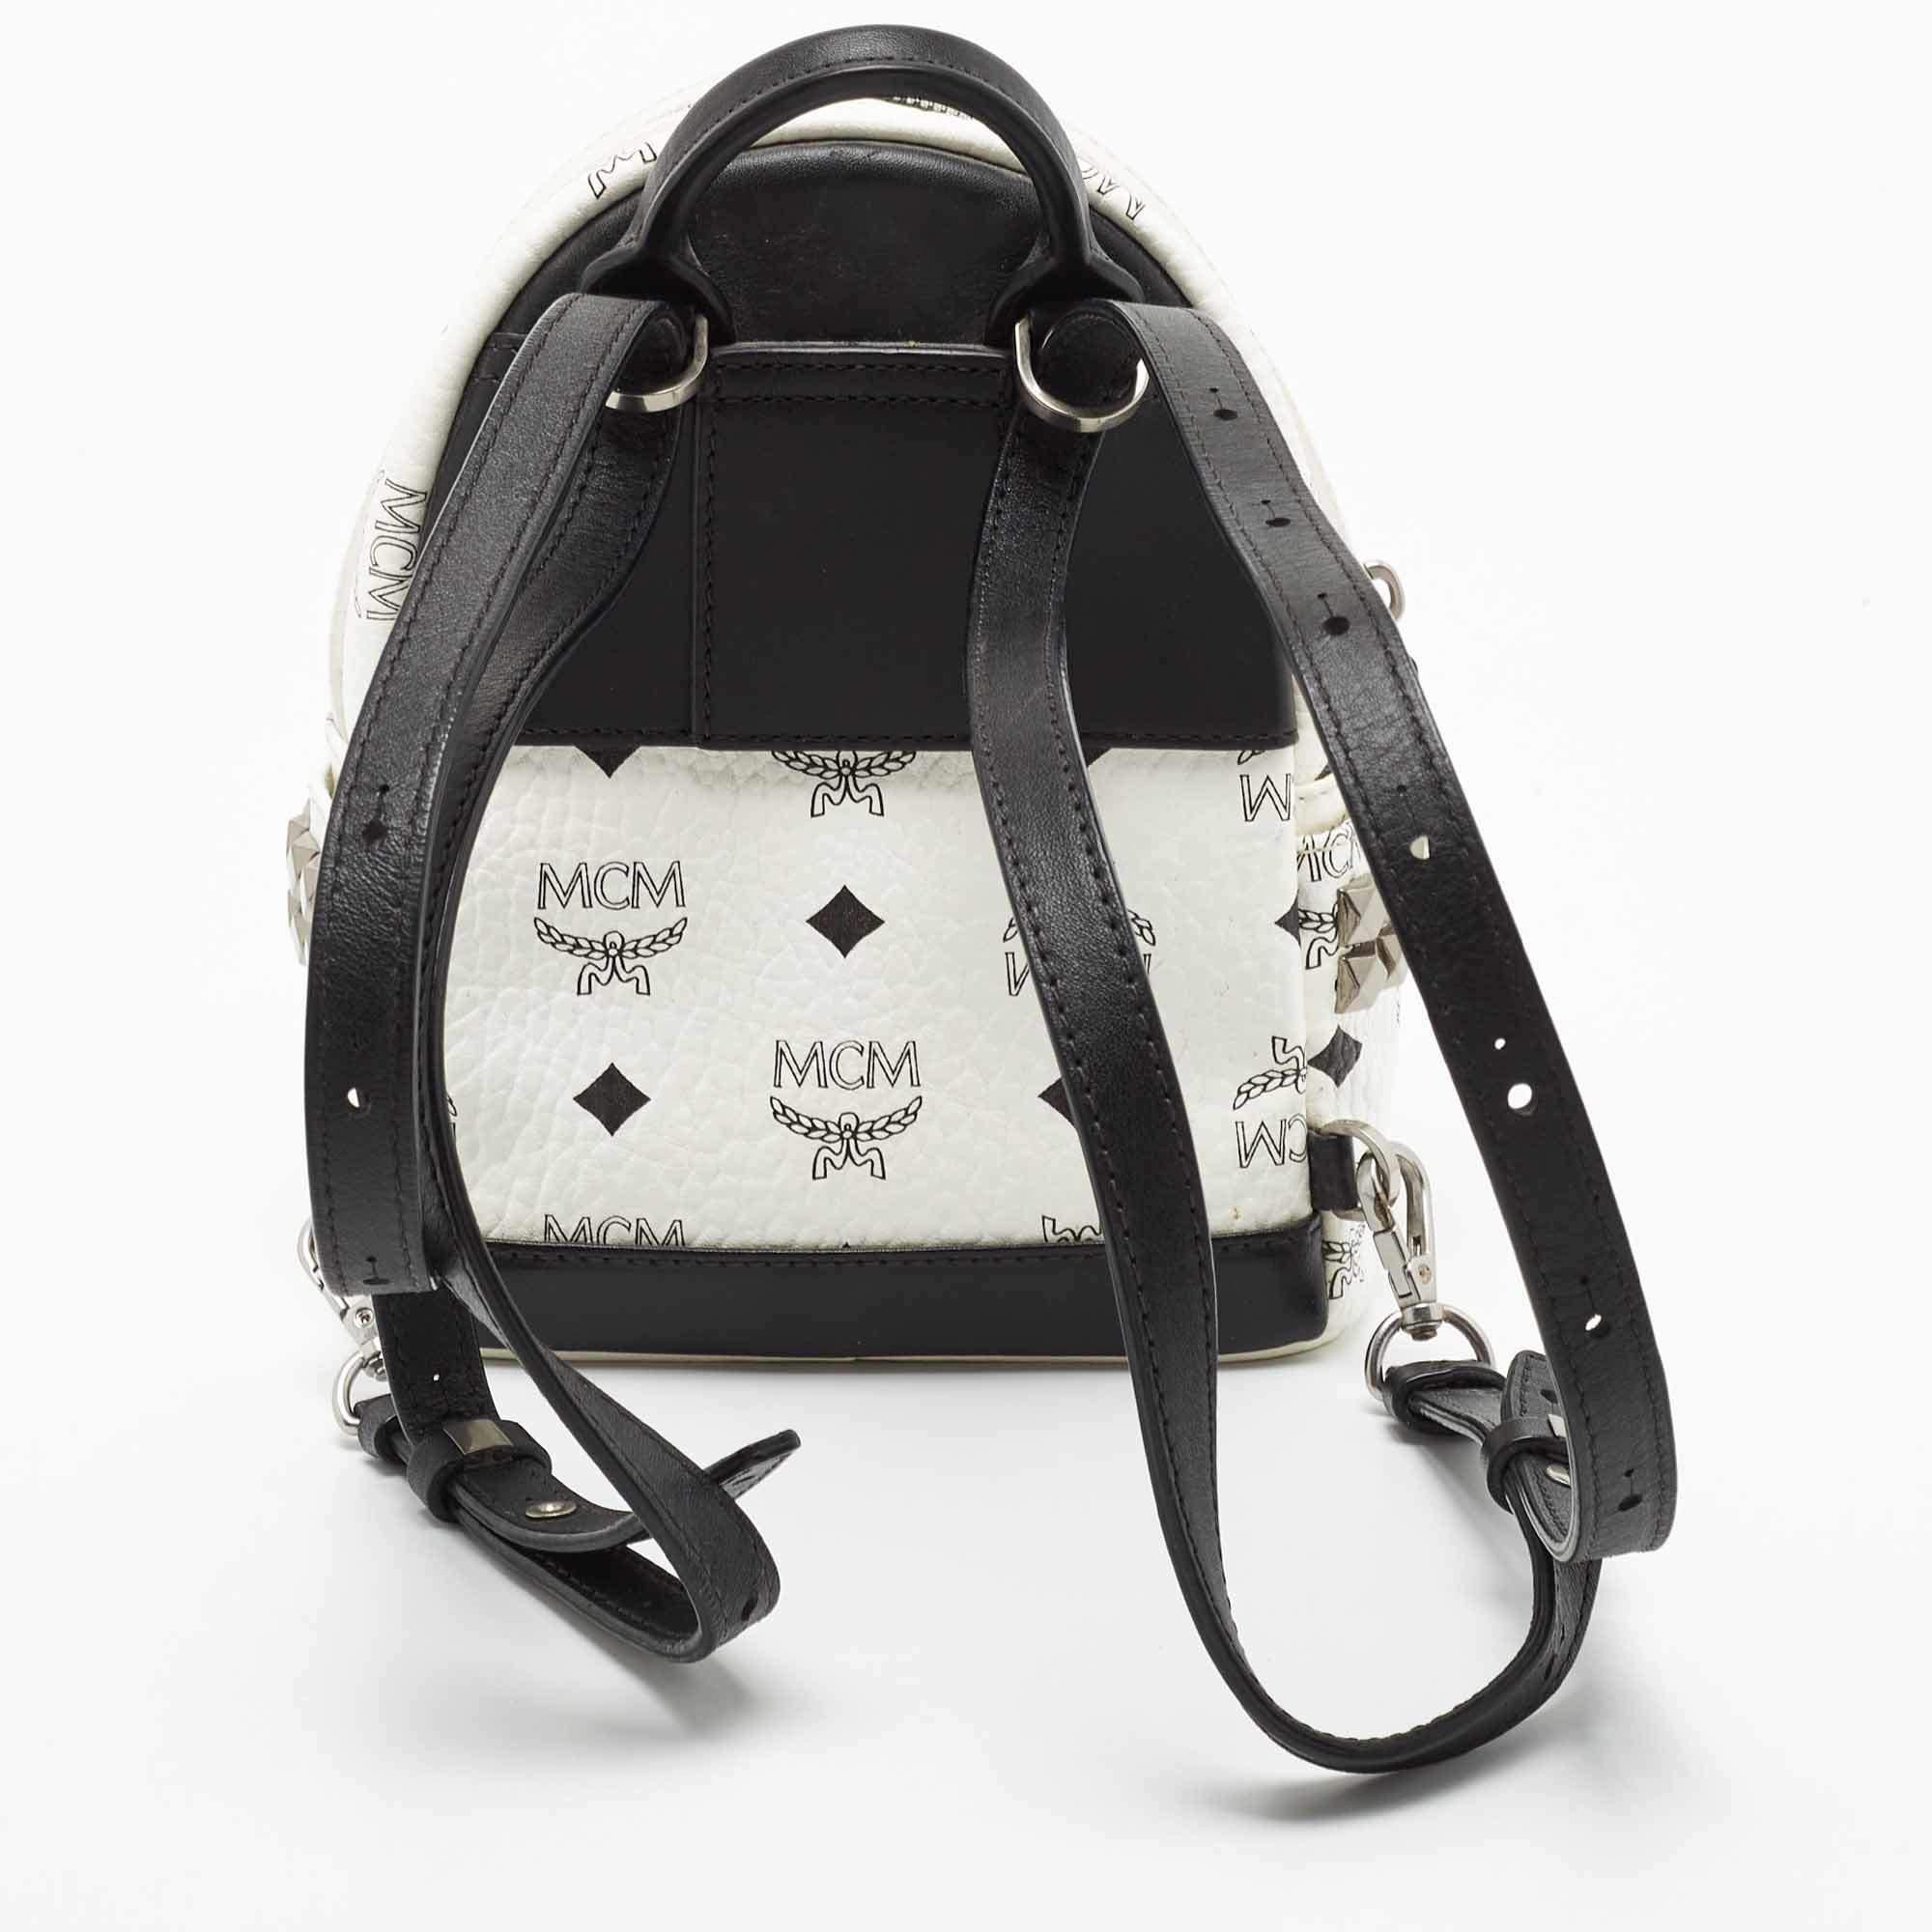 This MCM Stark-Bebe Boo backpack will come in handy for daily use or as a style statement. It is crafted from white/black Visetos-coated canvas & leather. It features a front zip pocket and a slip pocket on the sides.

